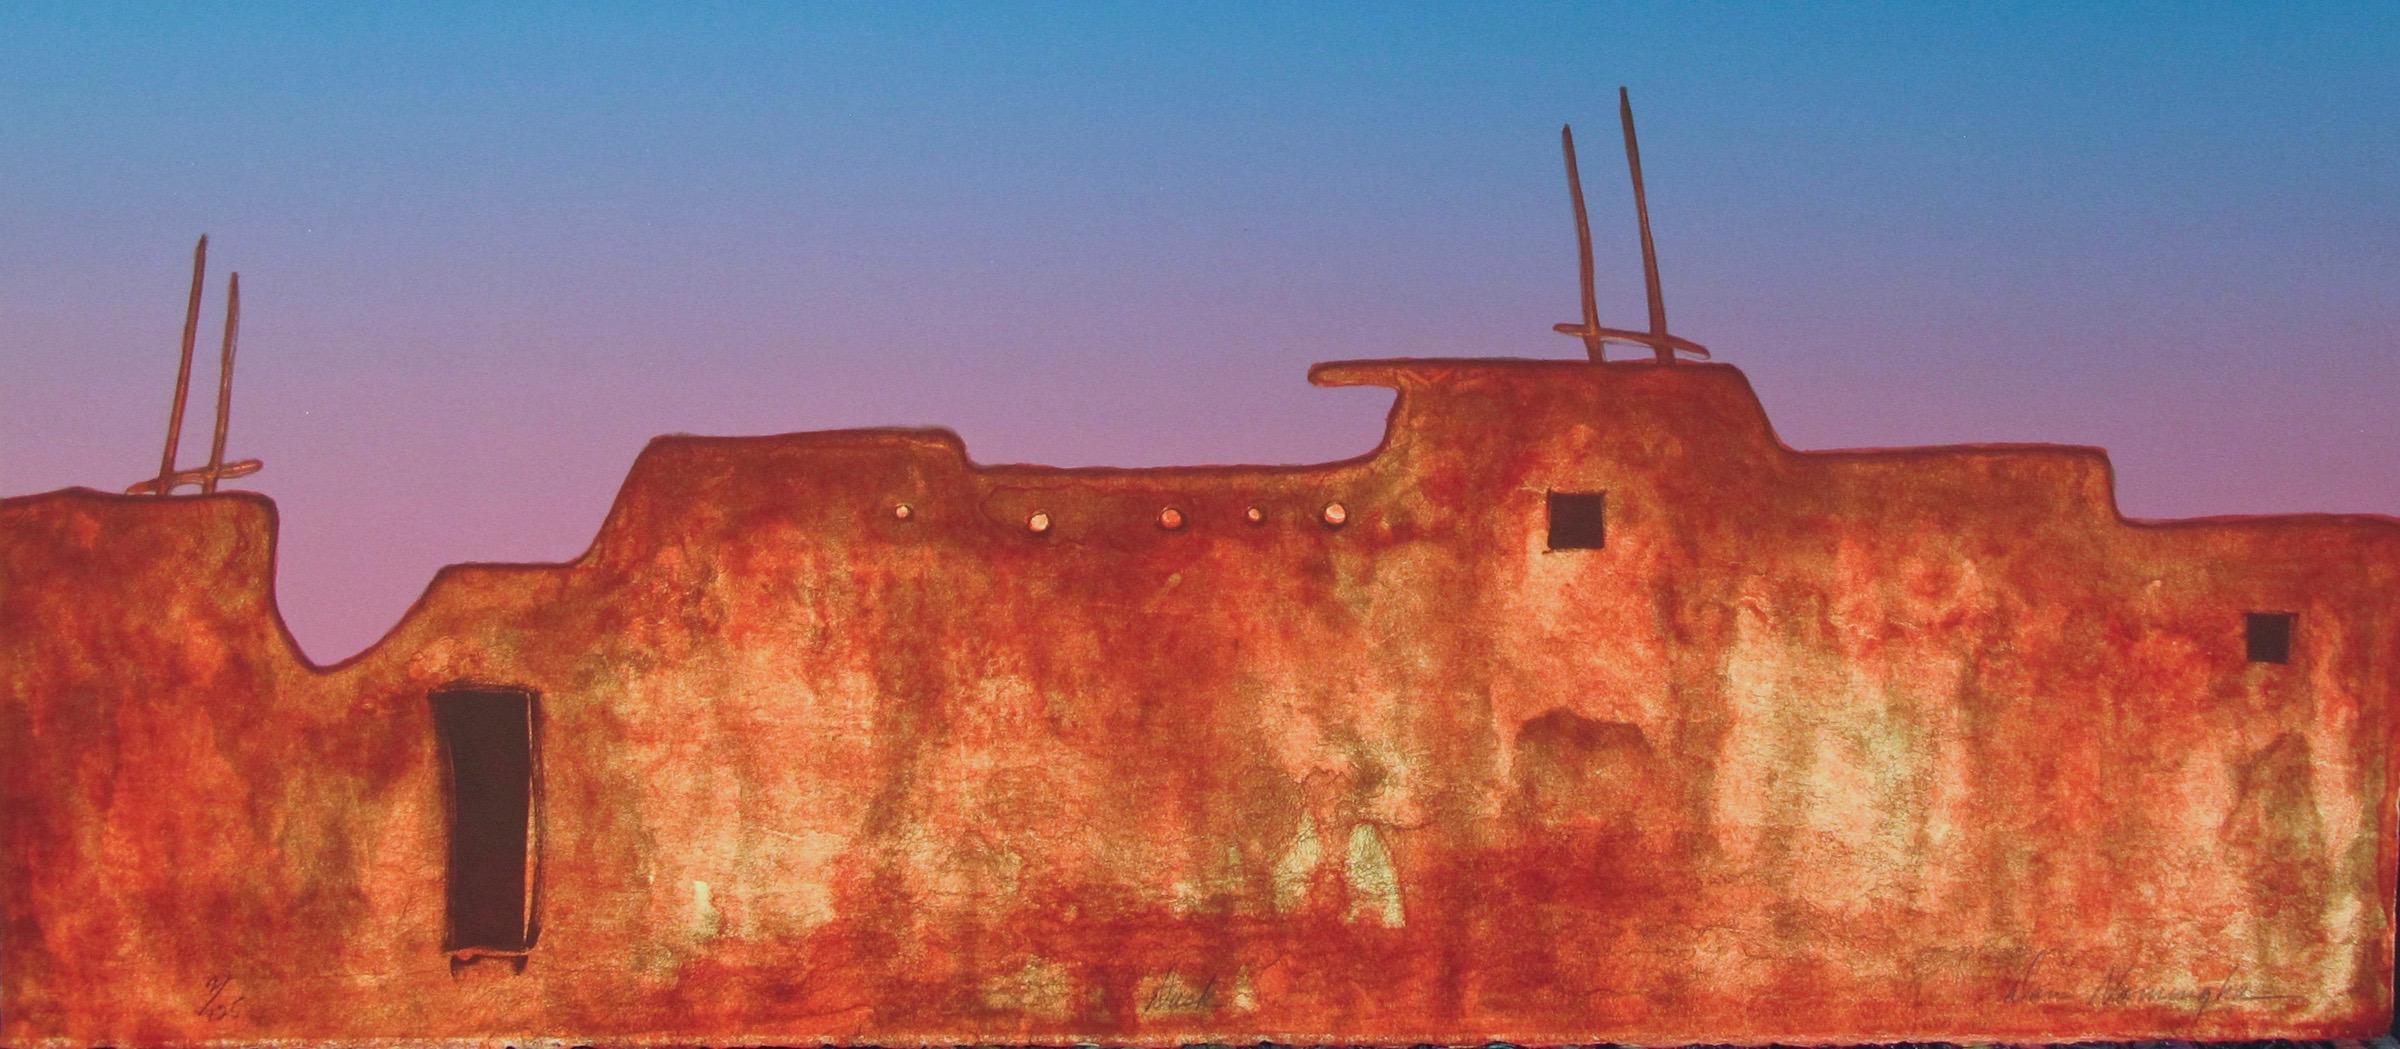 Dusk, Hopi Arizona landscape lithograph contemporary by Dan Namingha purple pink

hand pulled limited edition lithograph signed and numbered by the artist  

We also present paintings, prints and sculpture by Southwestern luminary, DAN NAMINGHA. Our